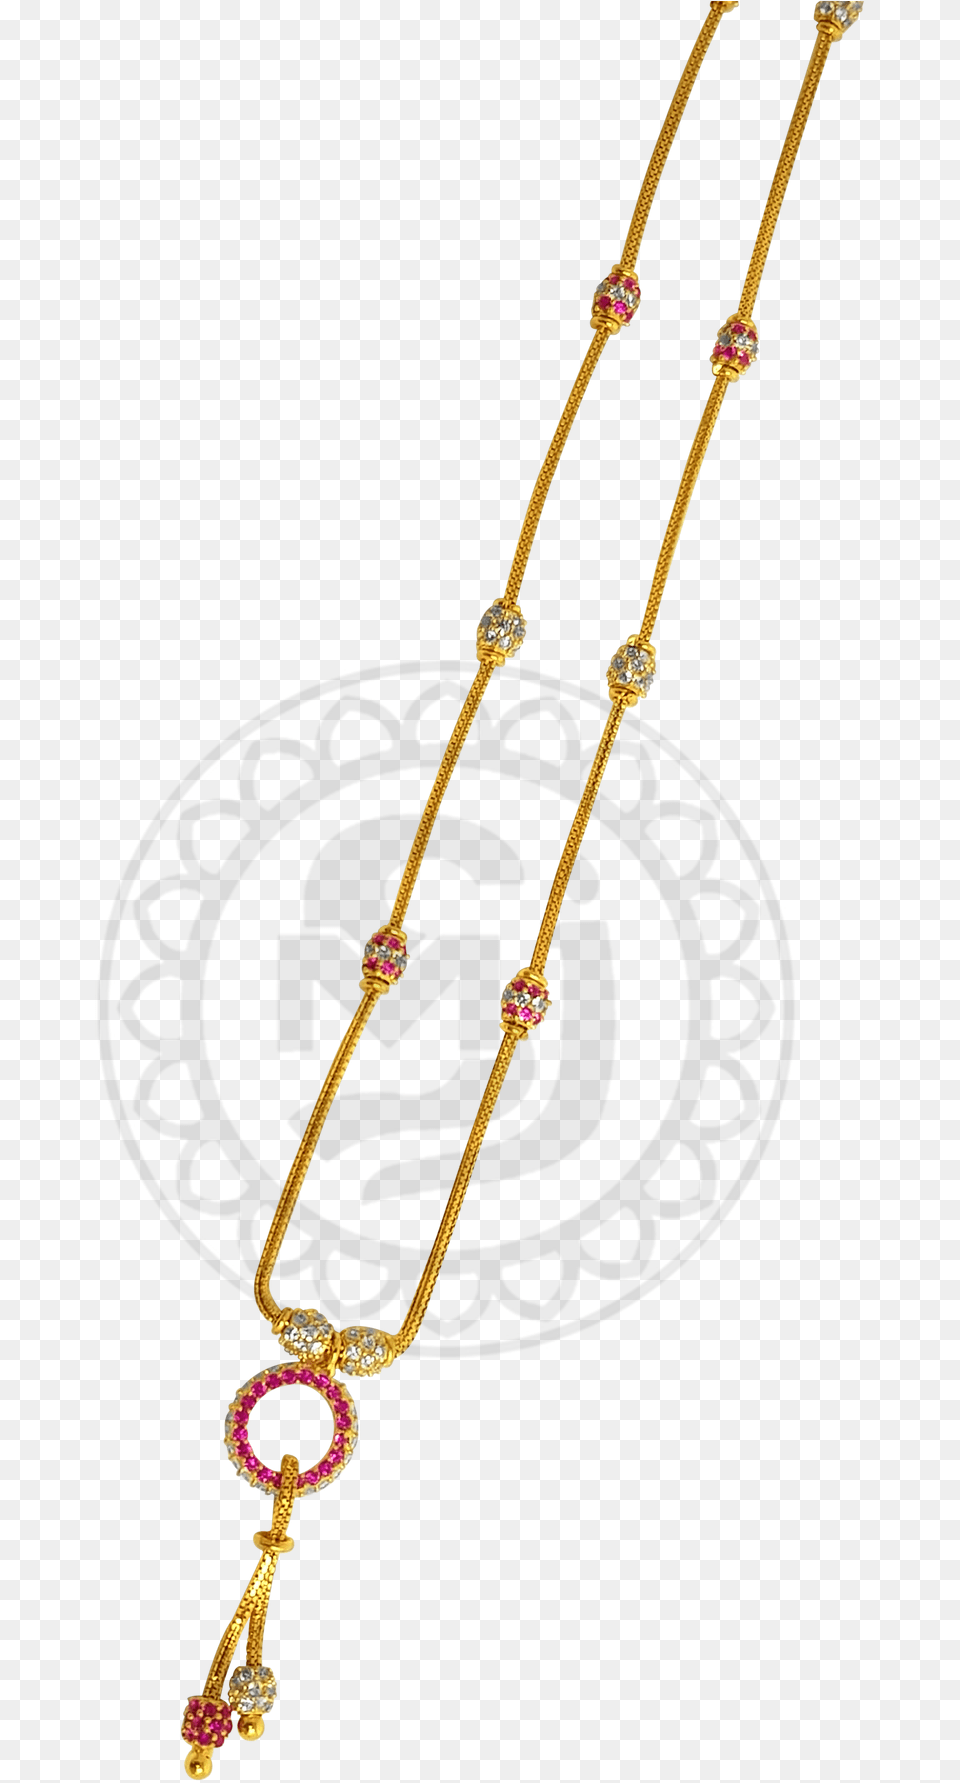 Download Hd Gold Chains Chain Image Illustration, Accessories, Jewelry, Necklace, Bracelet Free Transparent Png